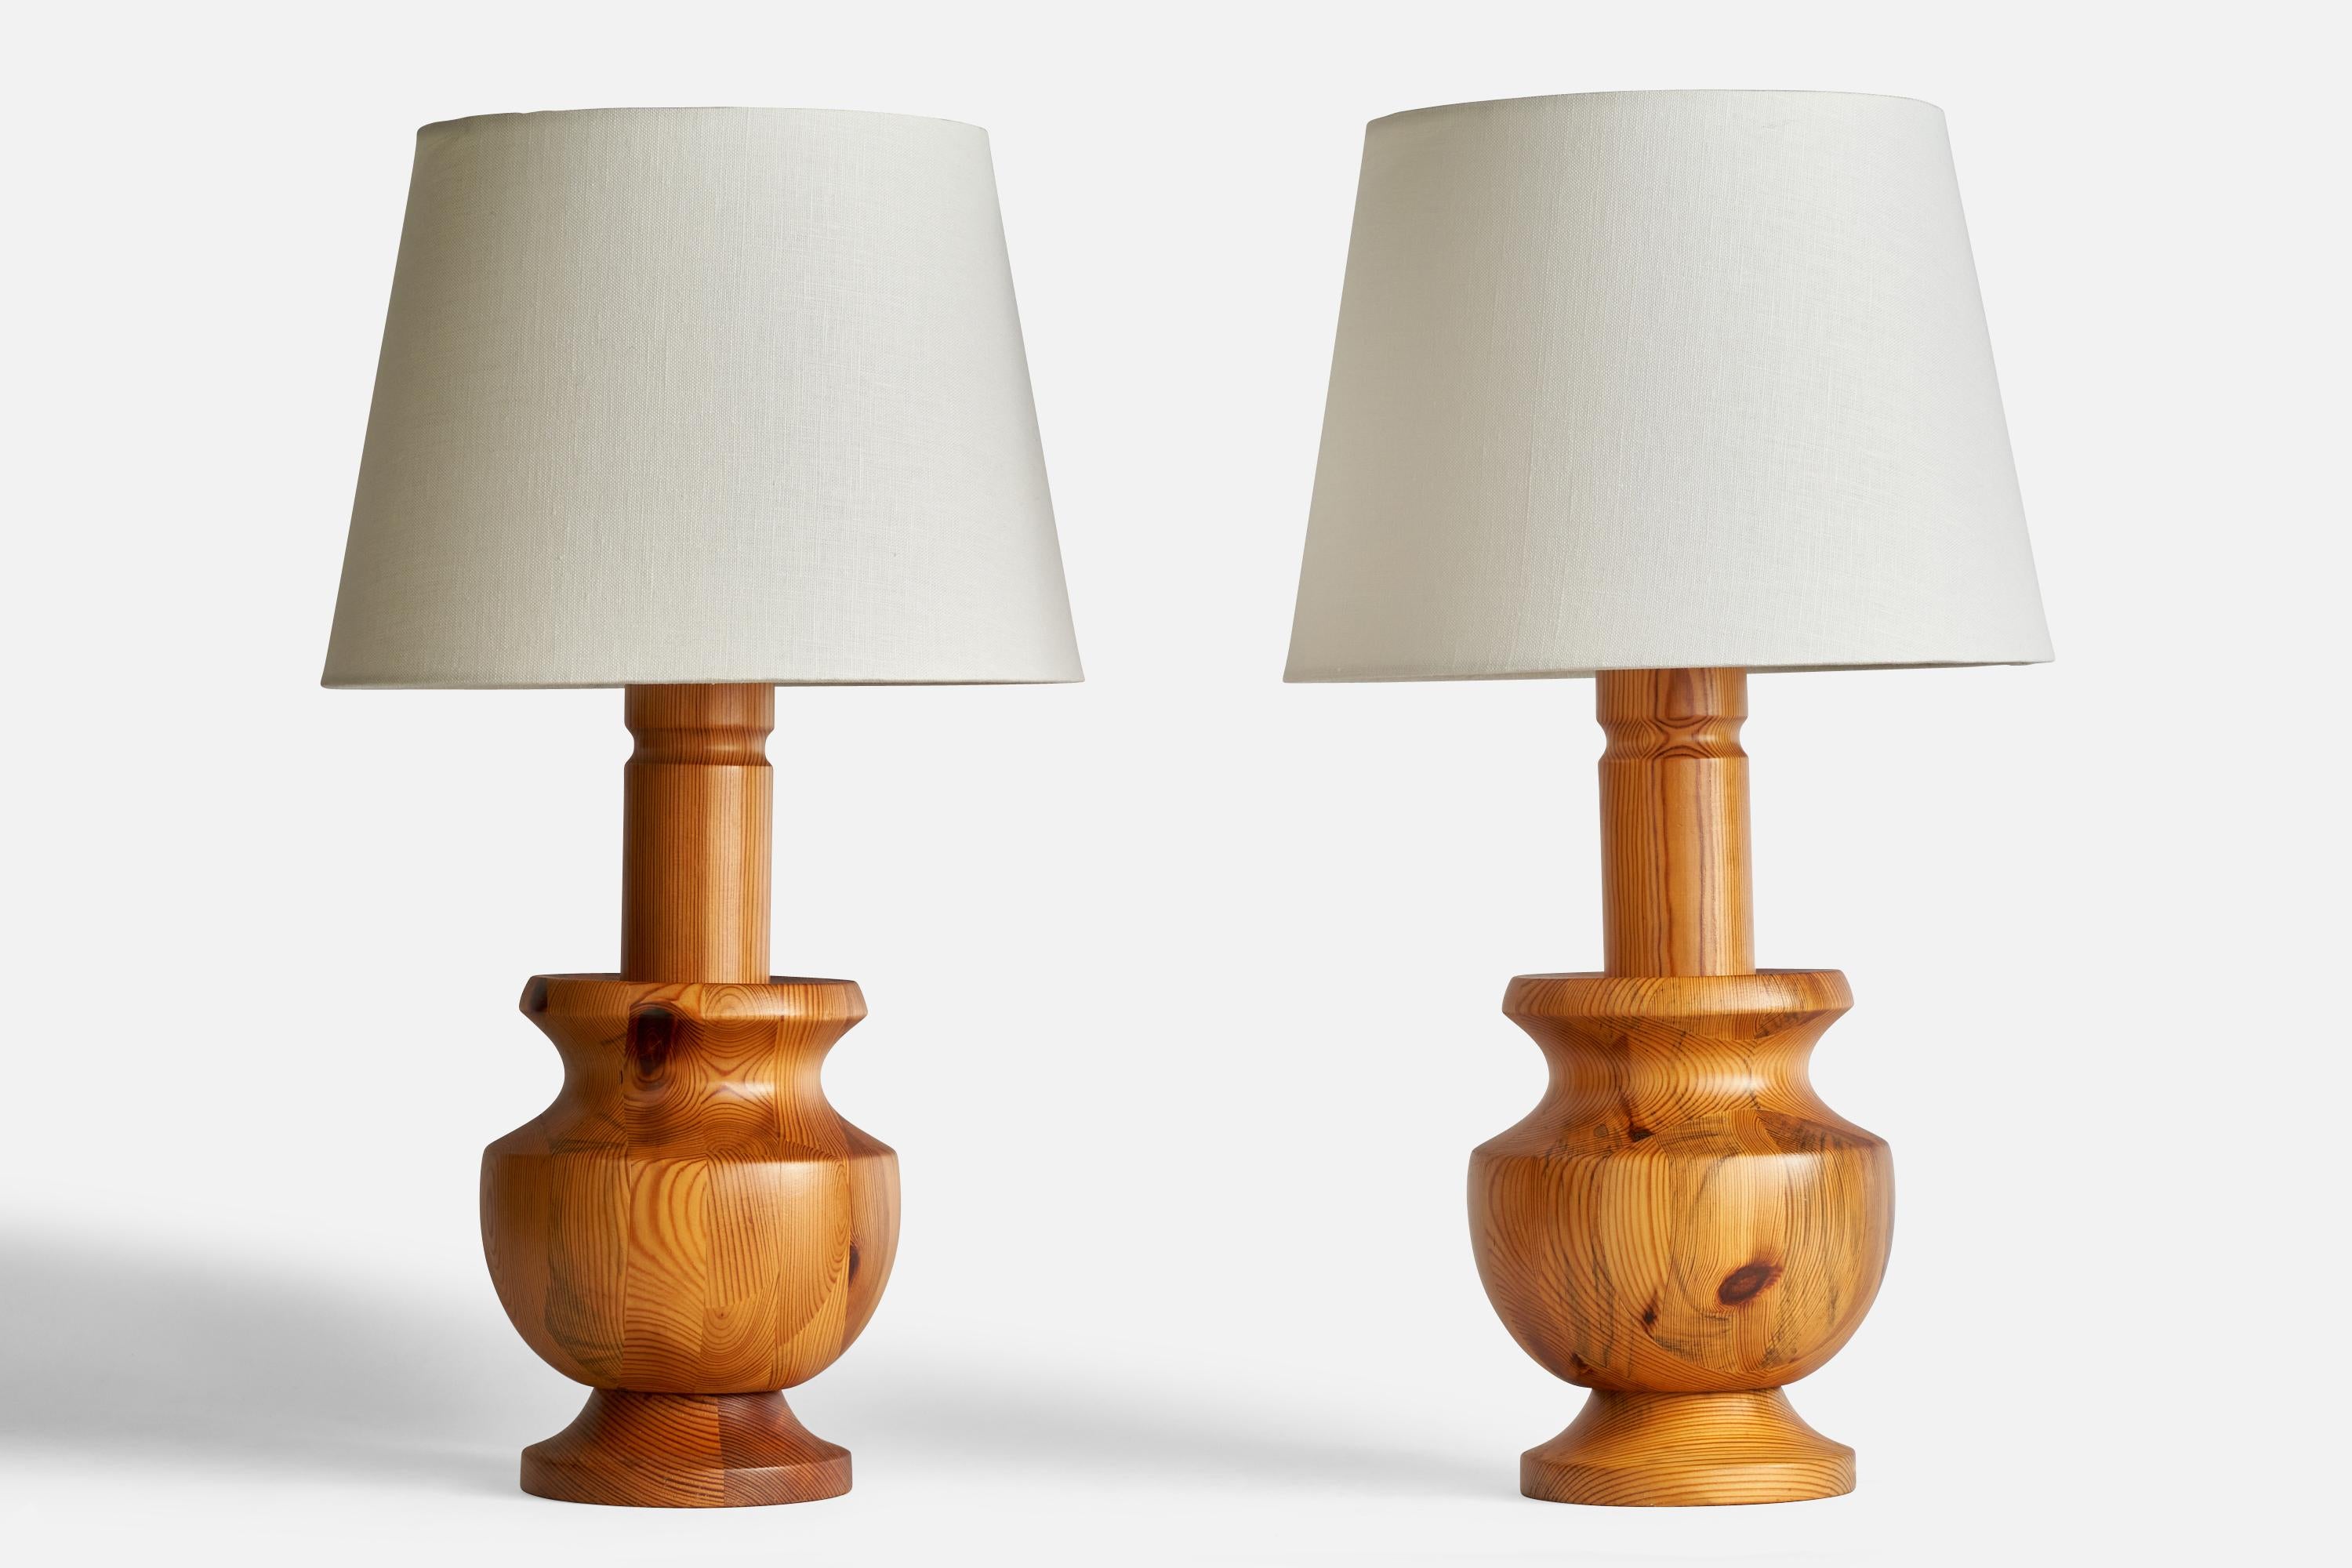 A pair of pine table lamps designed and produced in Sweden, c. 1960s.

Dimensions of Lamp (inches): 16.25” H x 6.5” Diameter
Dimensions of Shade (inches): 9”  Top Diameter x 12”  Bottom Diameter x 8.75” H
Dimensions of Lamp with Shade (inches): 22”